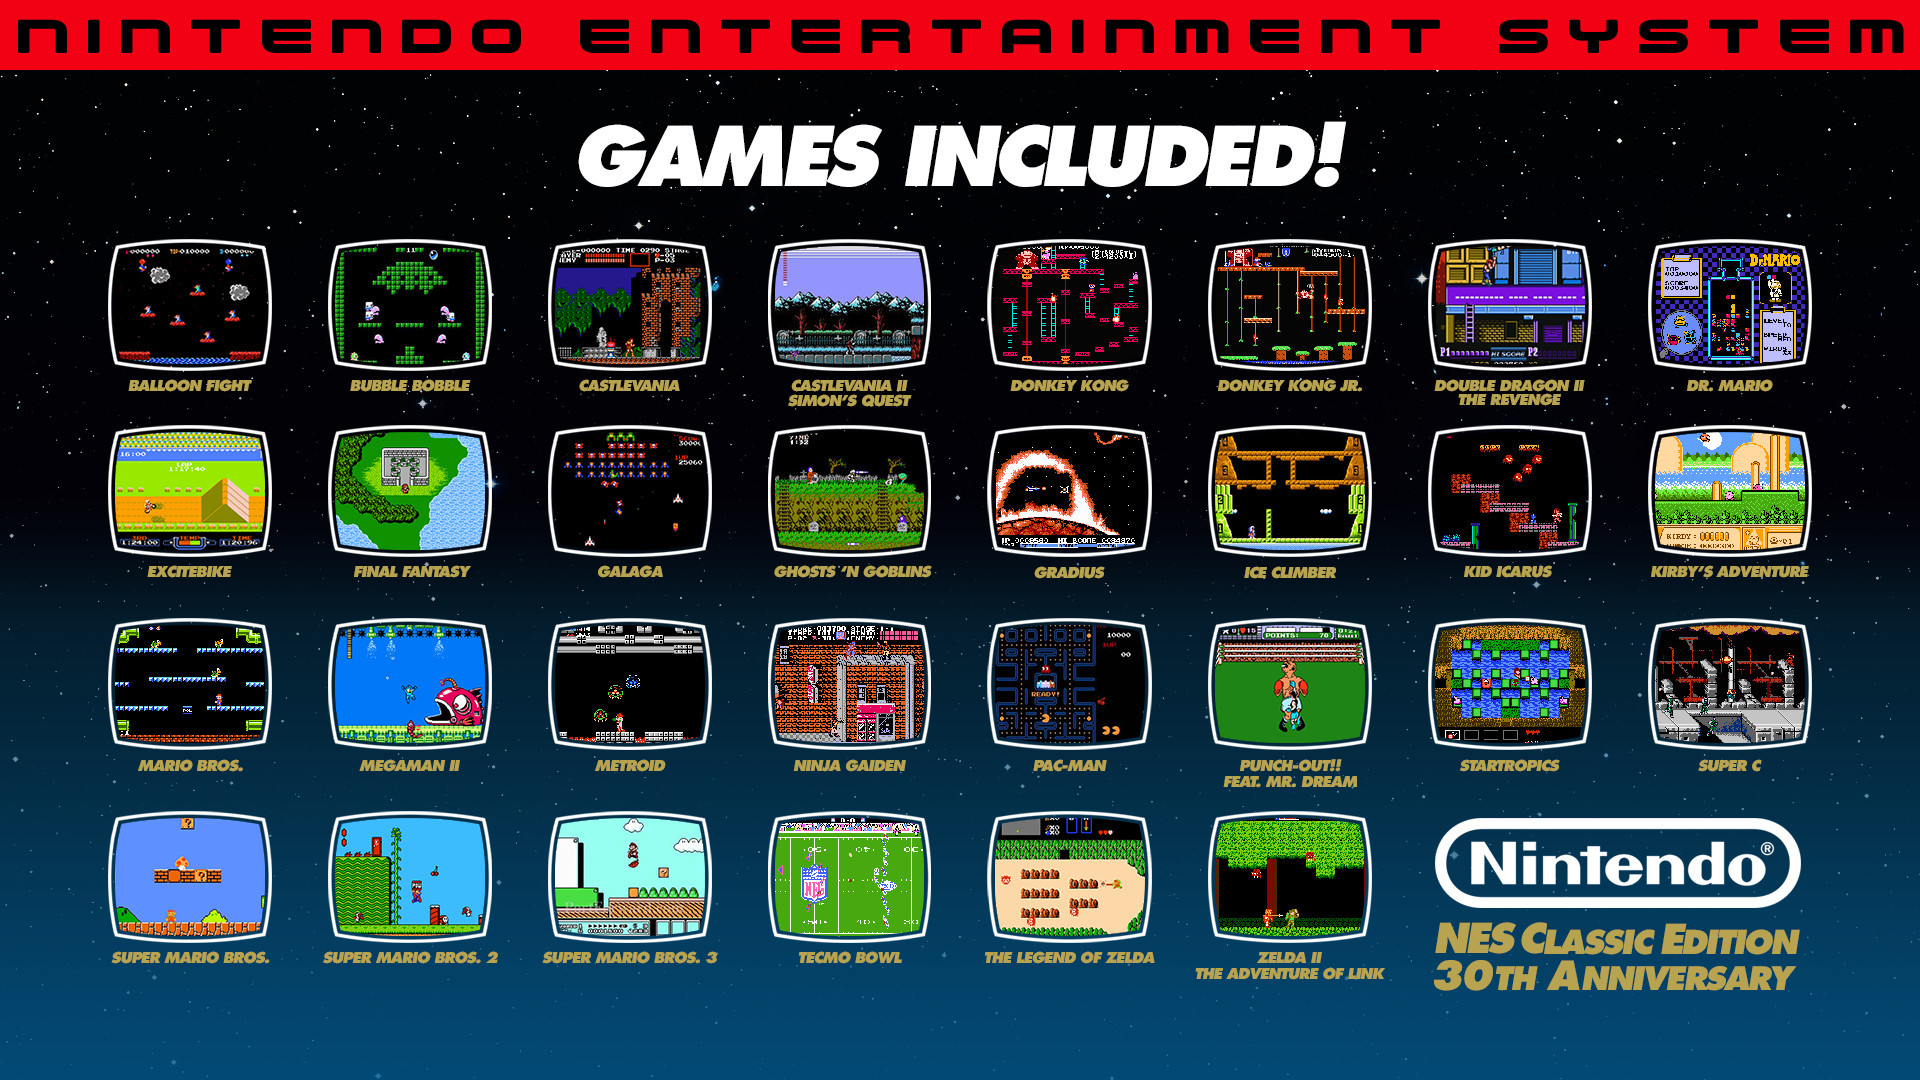 1920x1080 NES Classic Edition - 30th Anniversary Wallpaper by TheWez1981